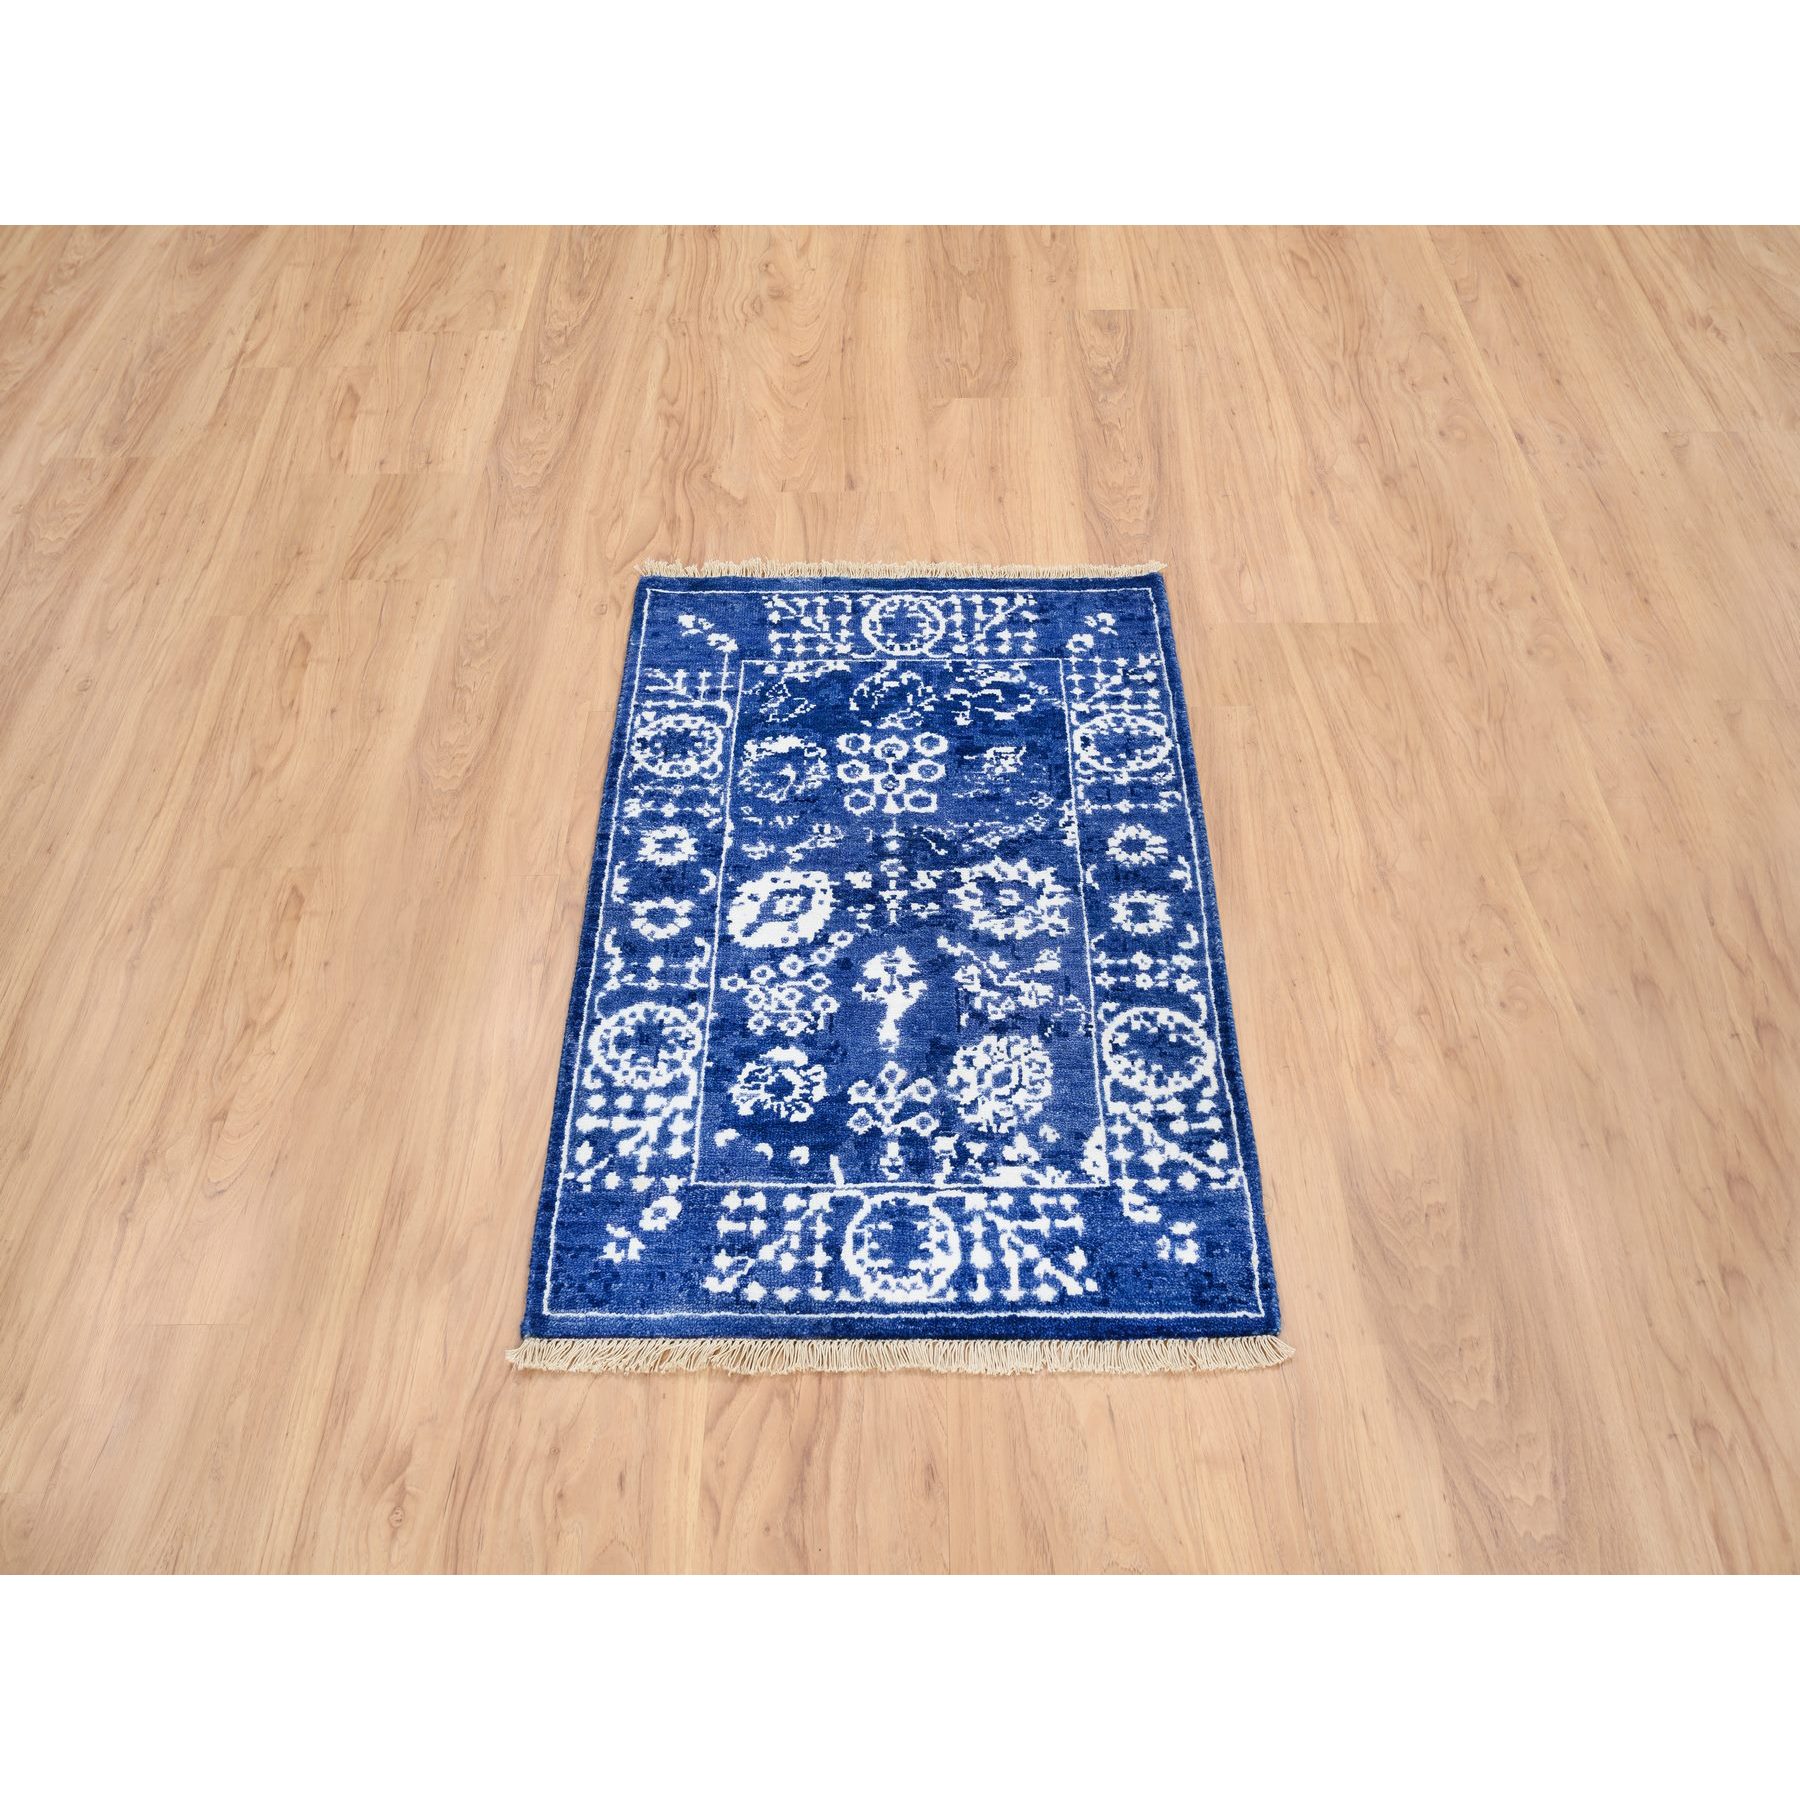 2'x3' Denim Blue, Tebraz with All Over Motifs Tone on Tone, Wool and Silk Hand Woven, Mat Oriental Rug 